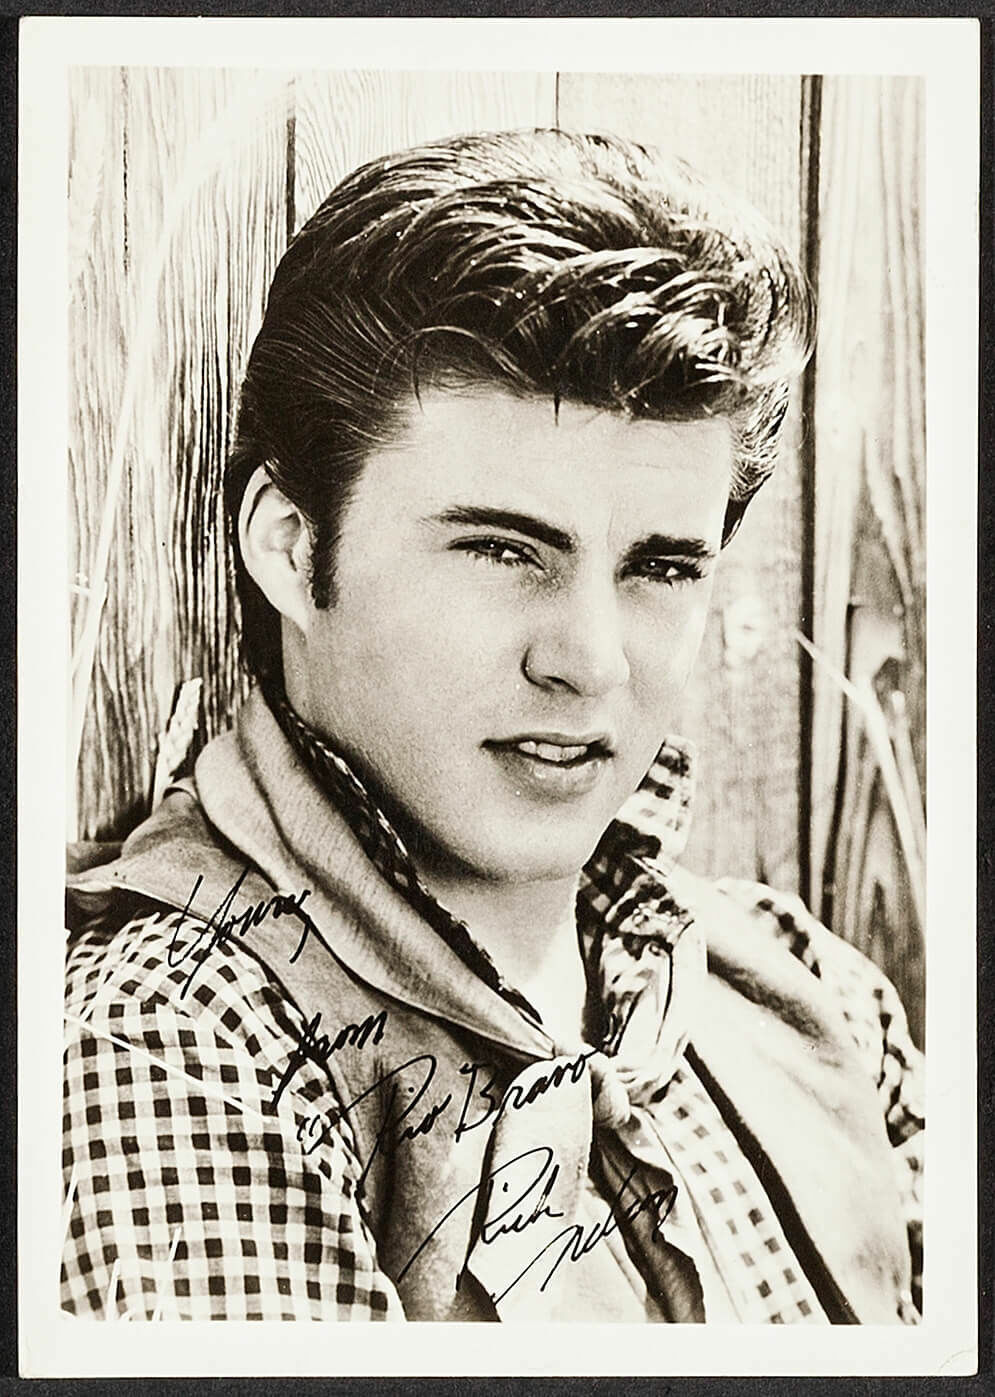 RICKY NELSON Signed Photo Poster paintinggraph - Rock 'n' Roll Pop Singer - Preprint